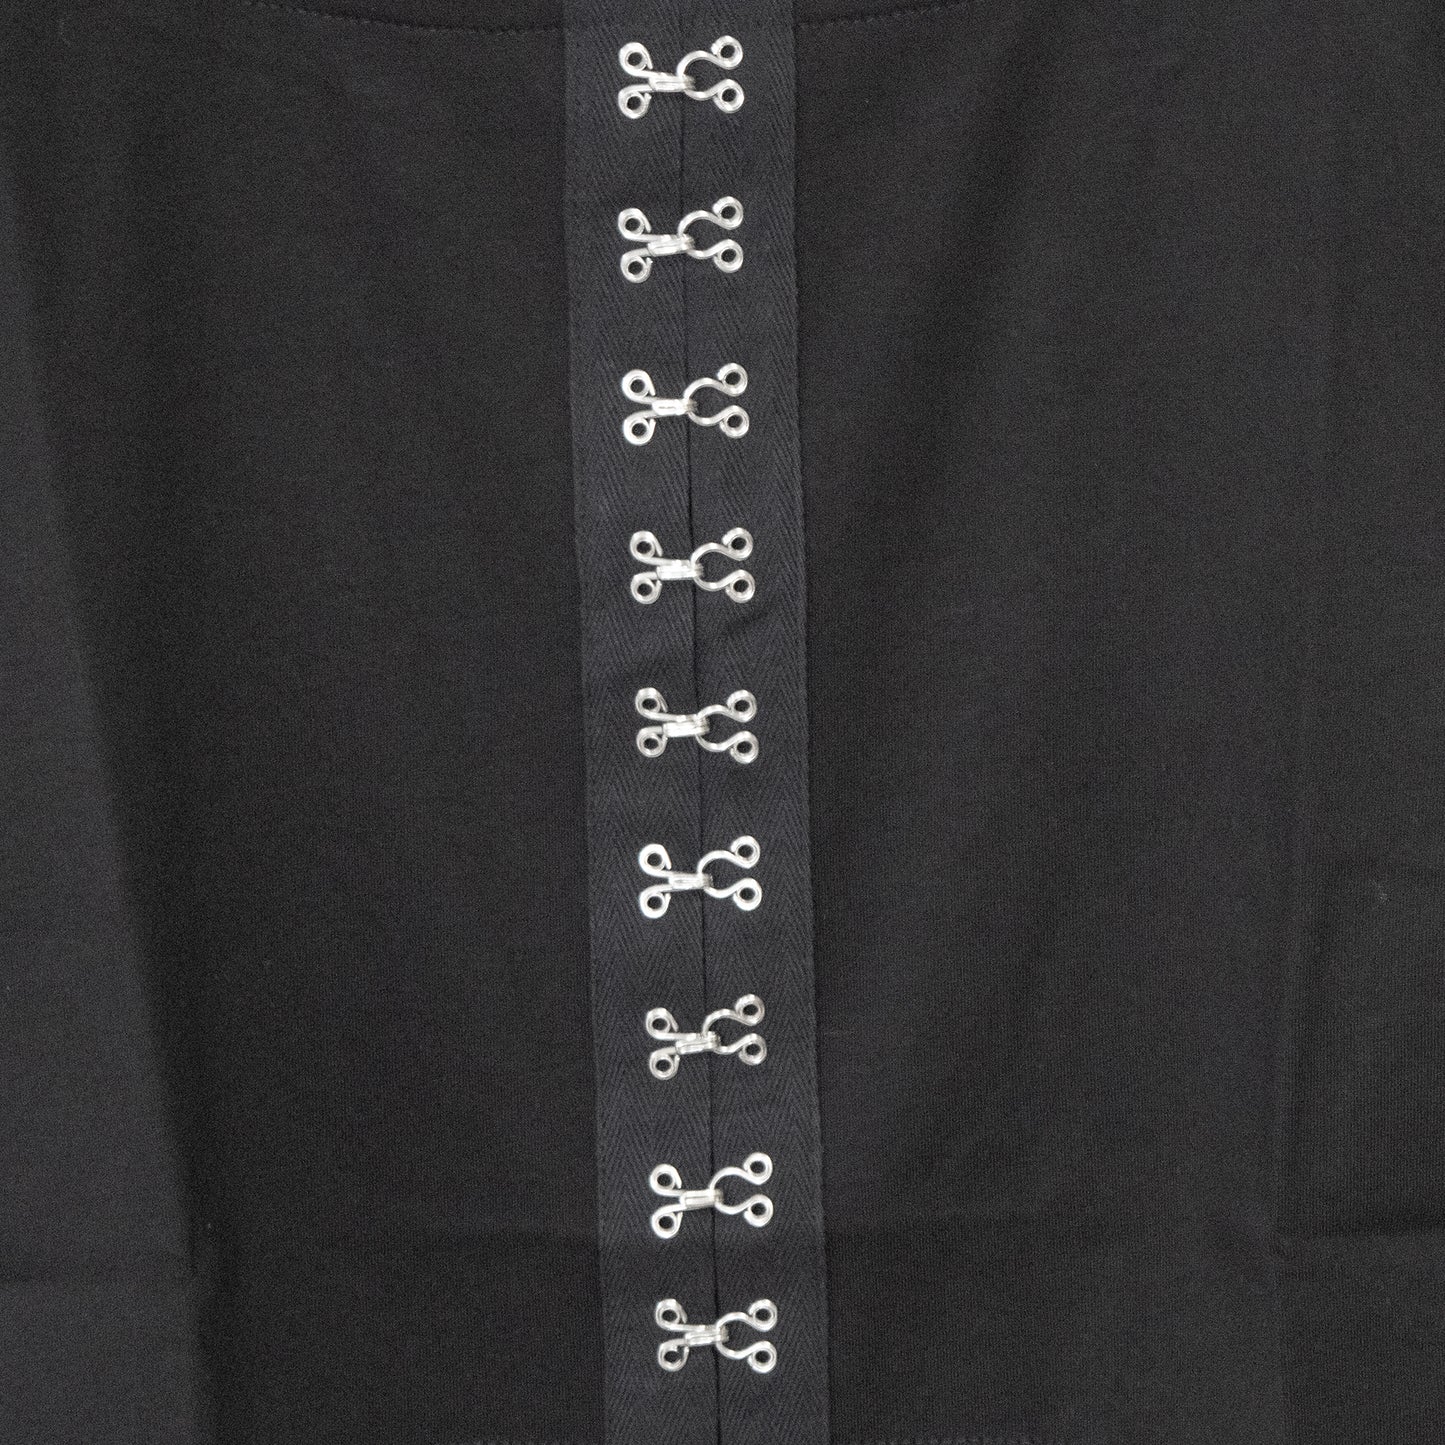 Front Hooks S/S T-shirt Black - YOUAREMYPOISON